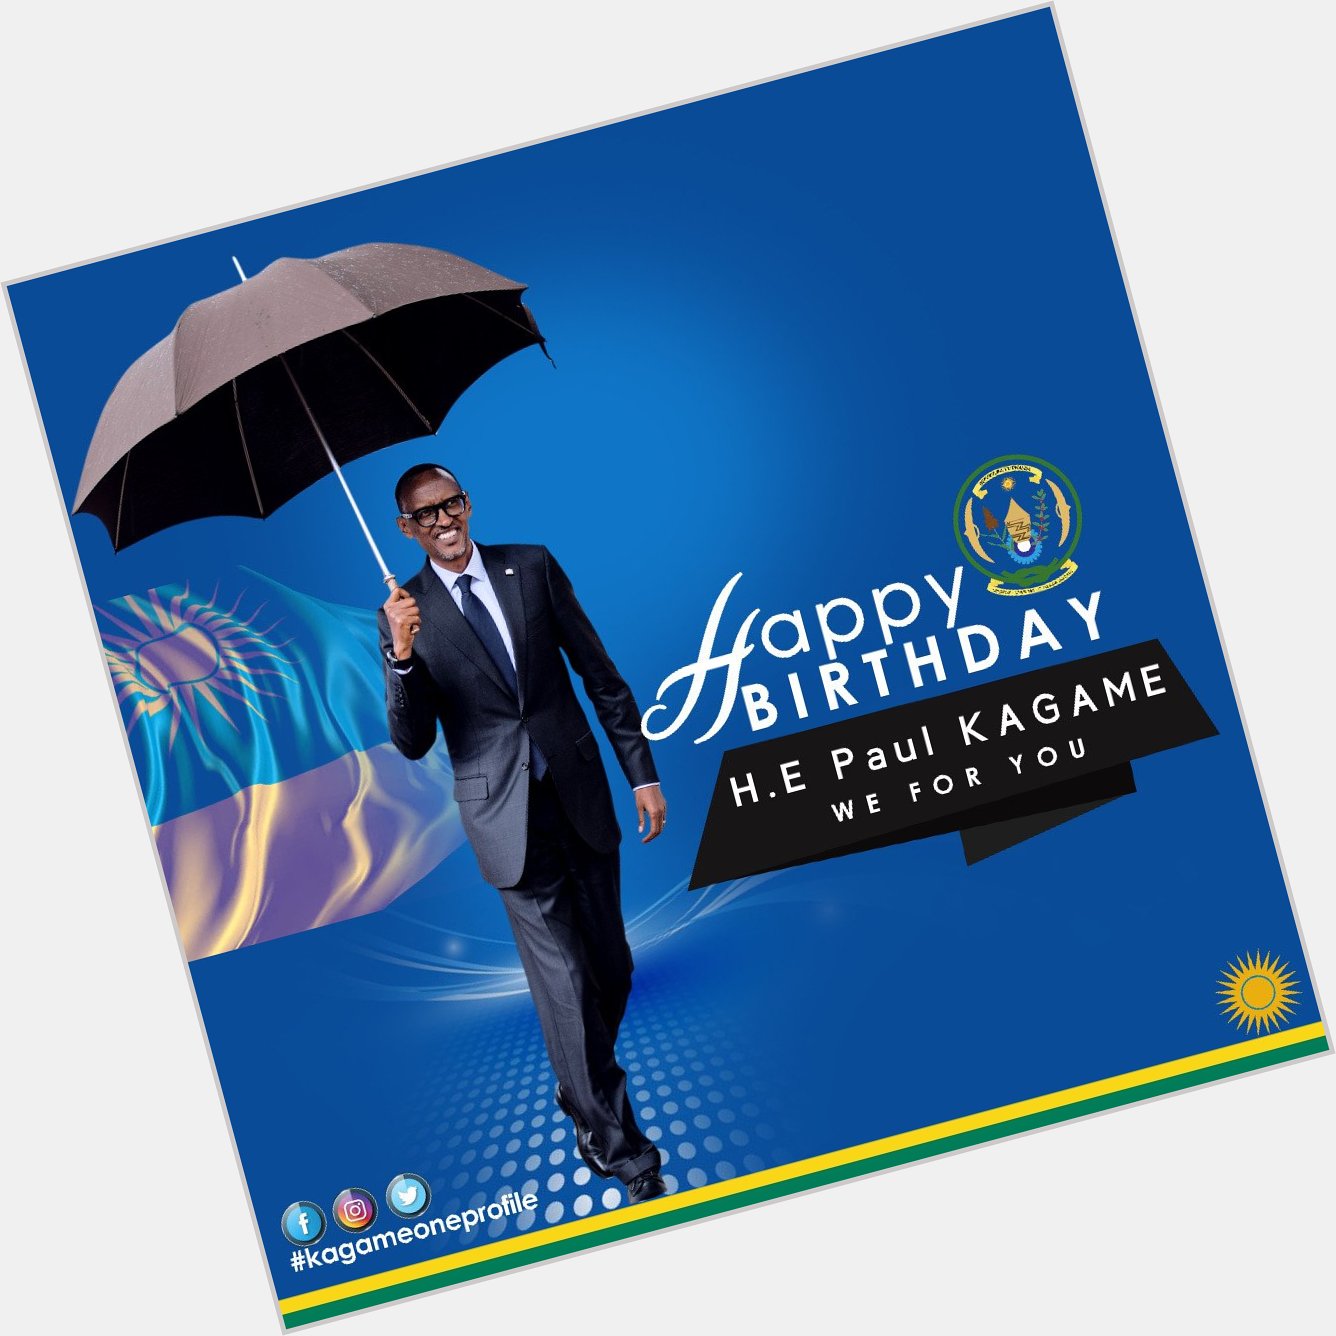 Happy birthday His Excellence Paul Kagame may he live longer to prosper 